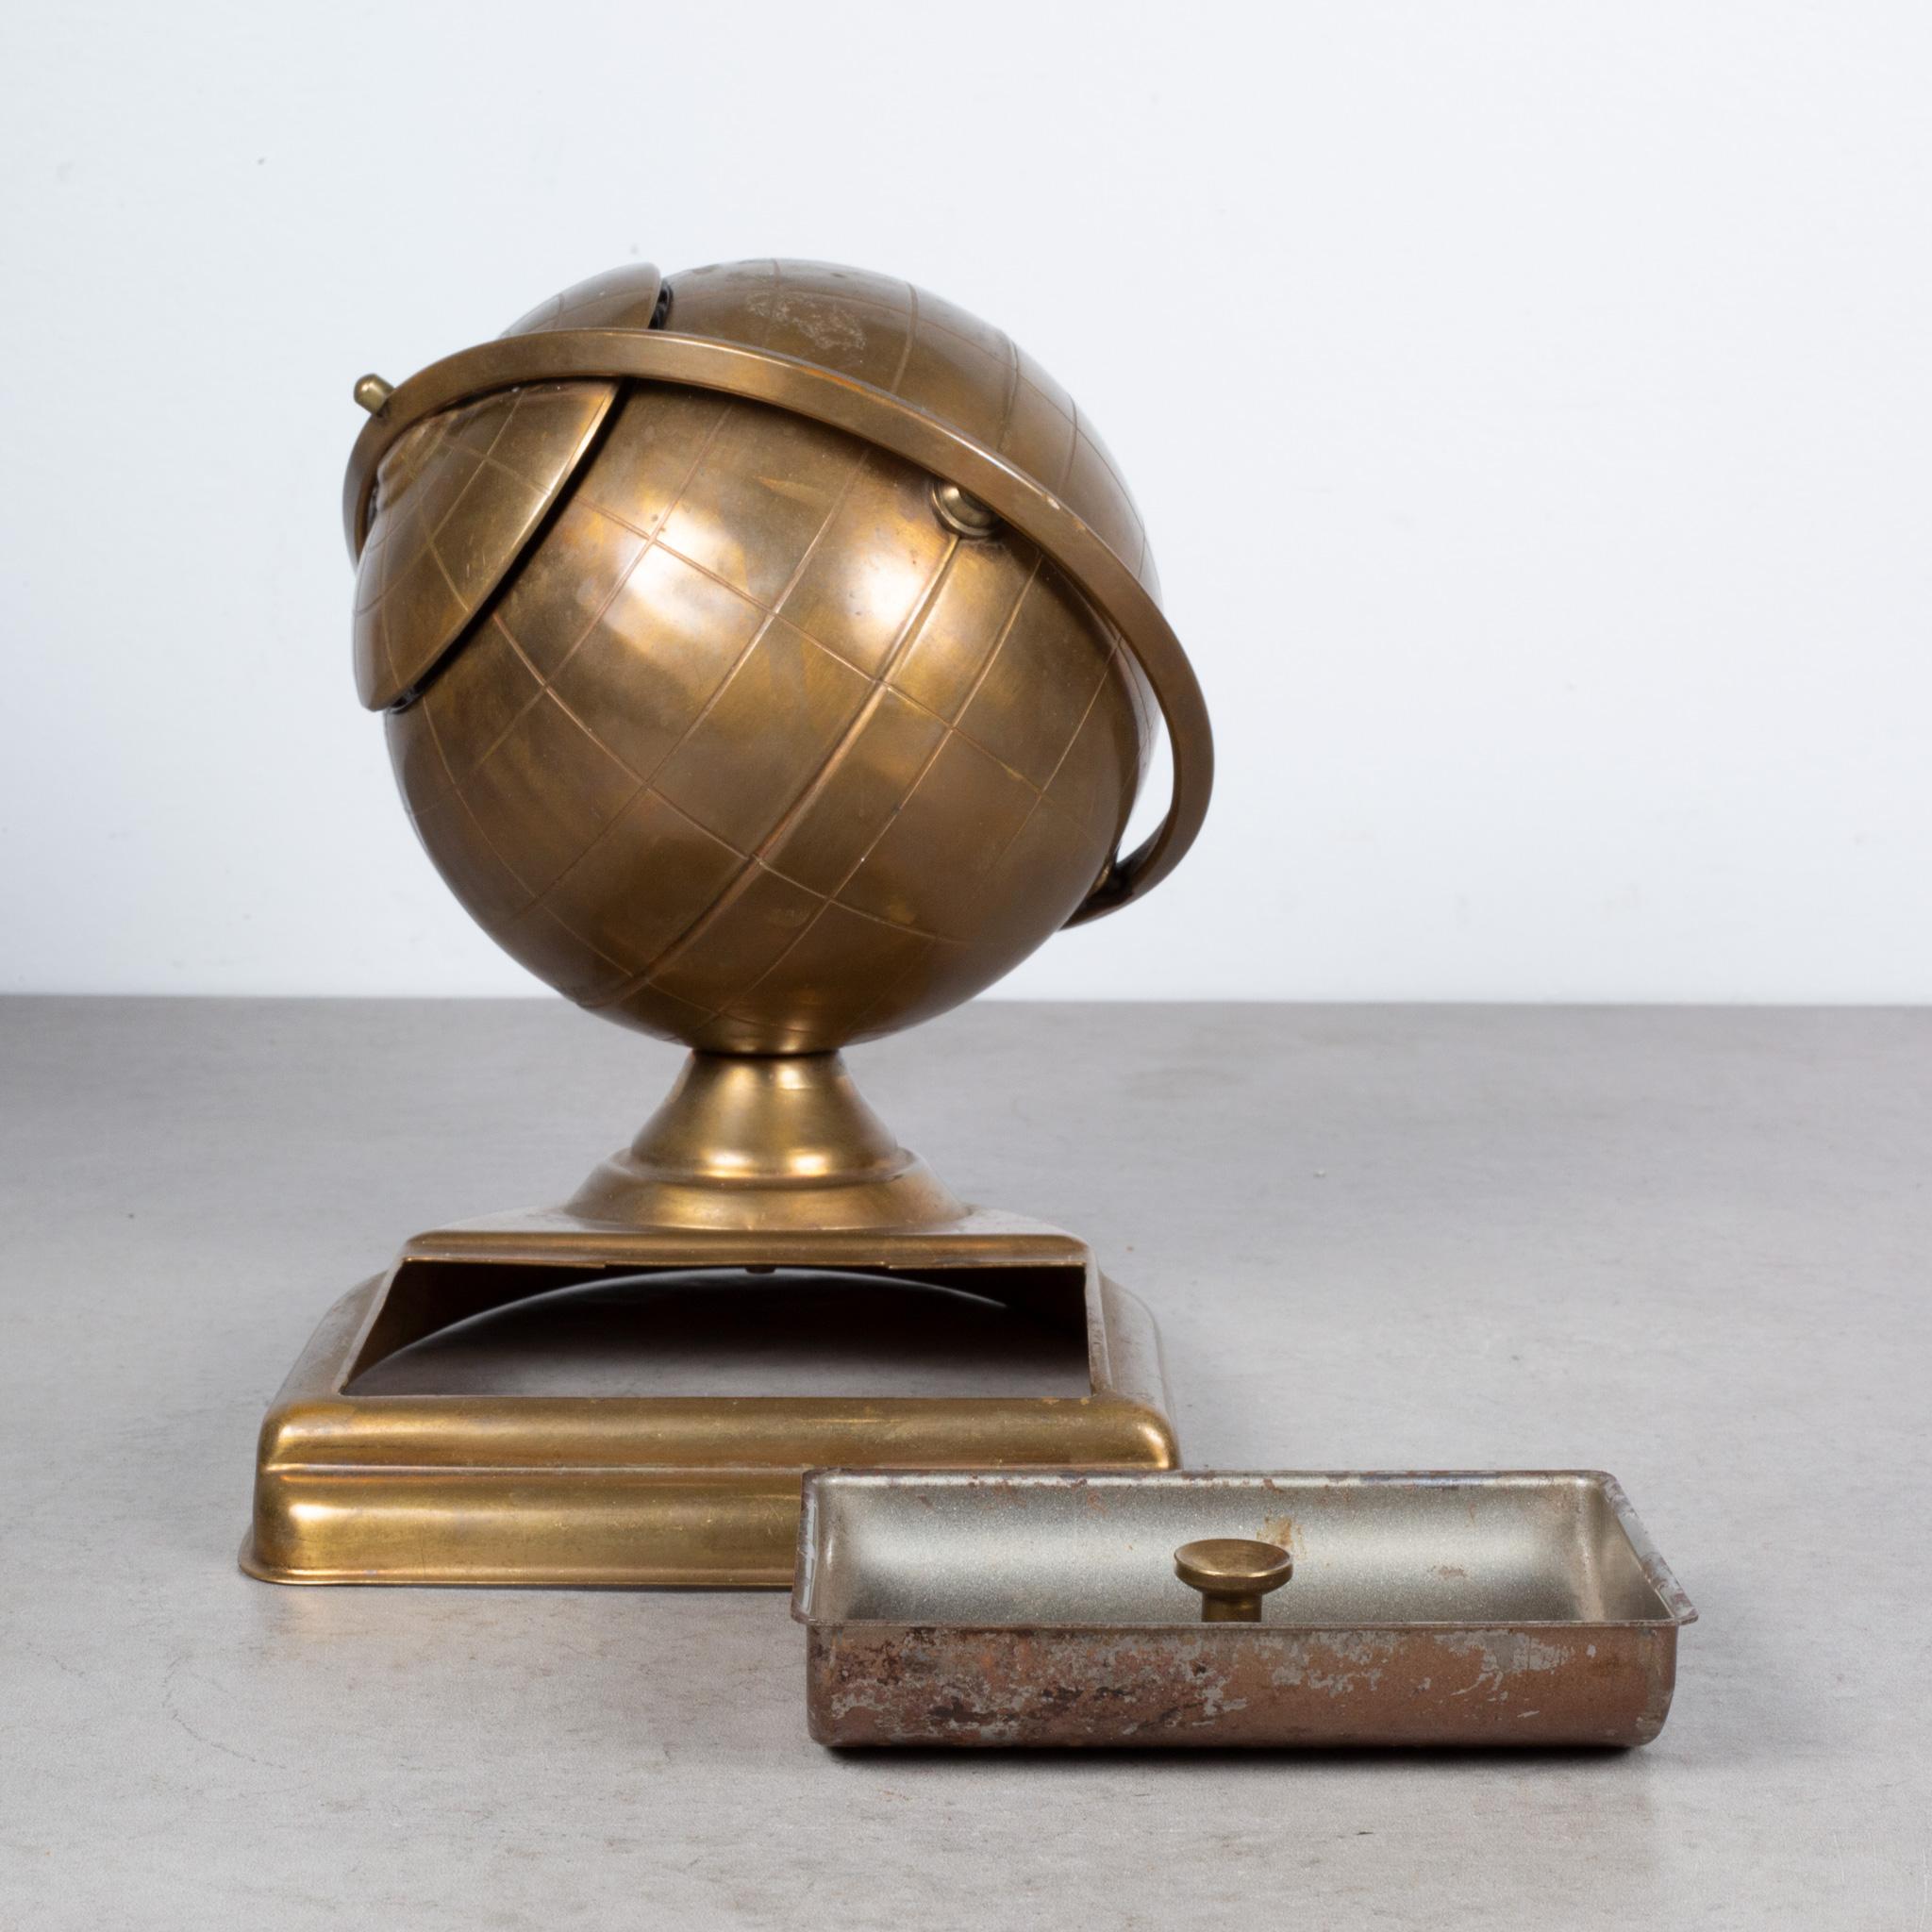 Metal Midcentury Brass Globe Cigarette Holder with Ashtray/Coin Dish, circa 1960